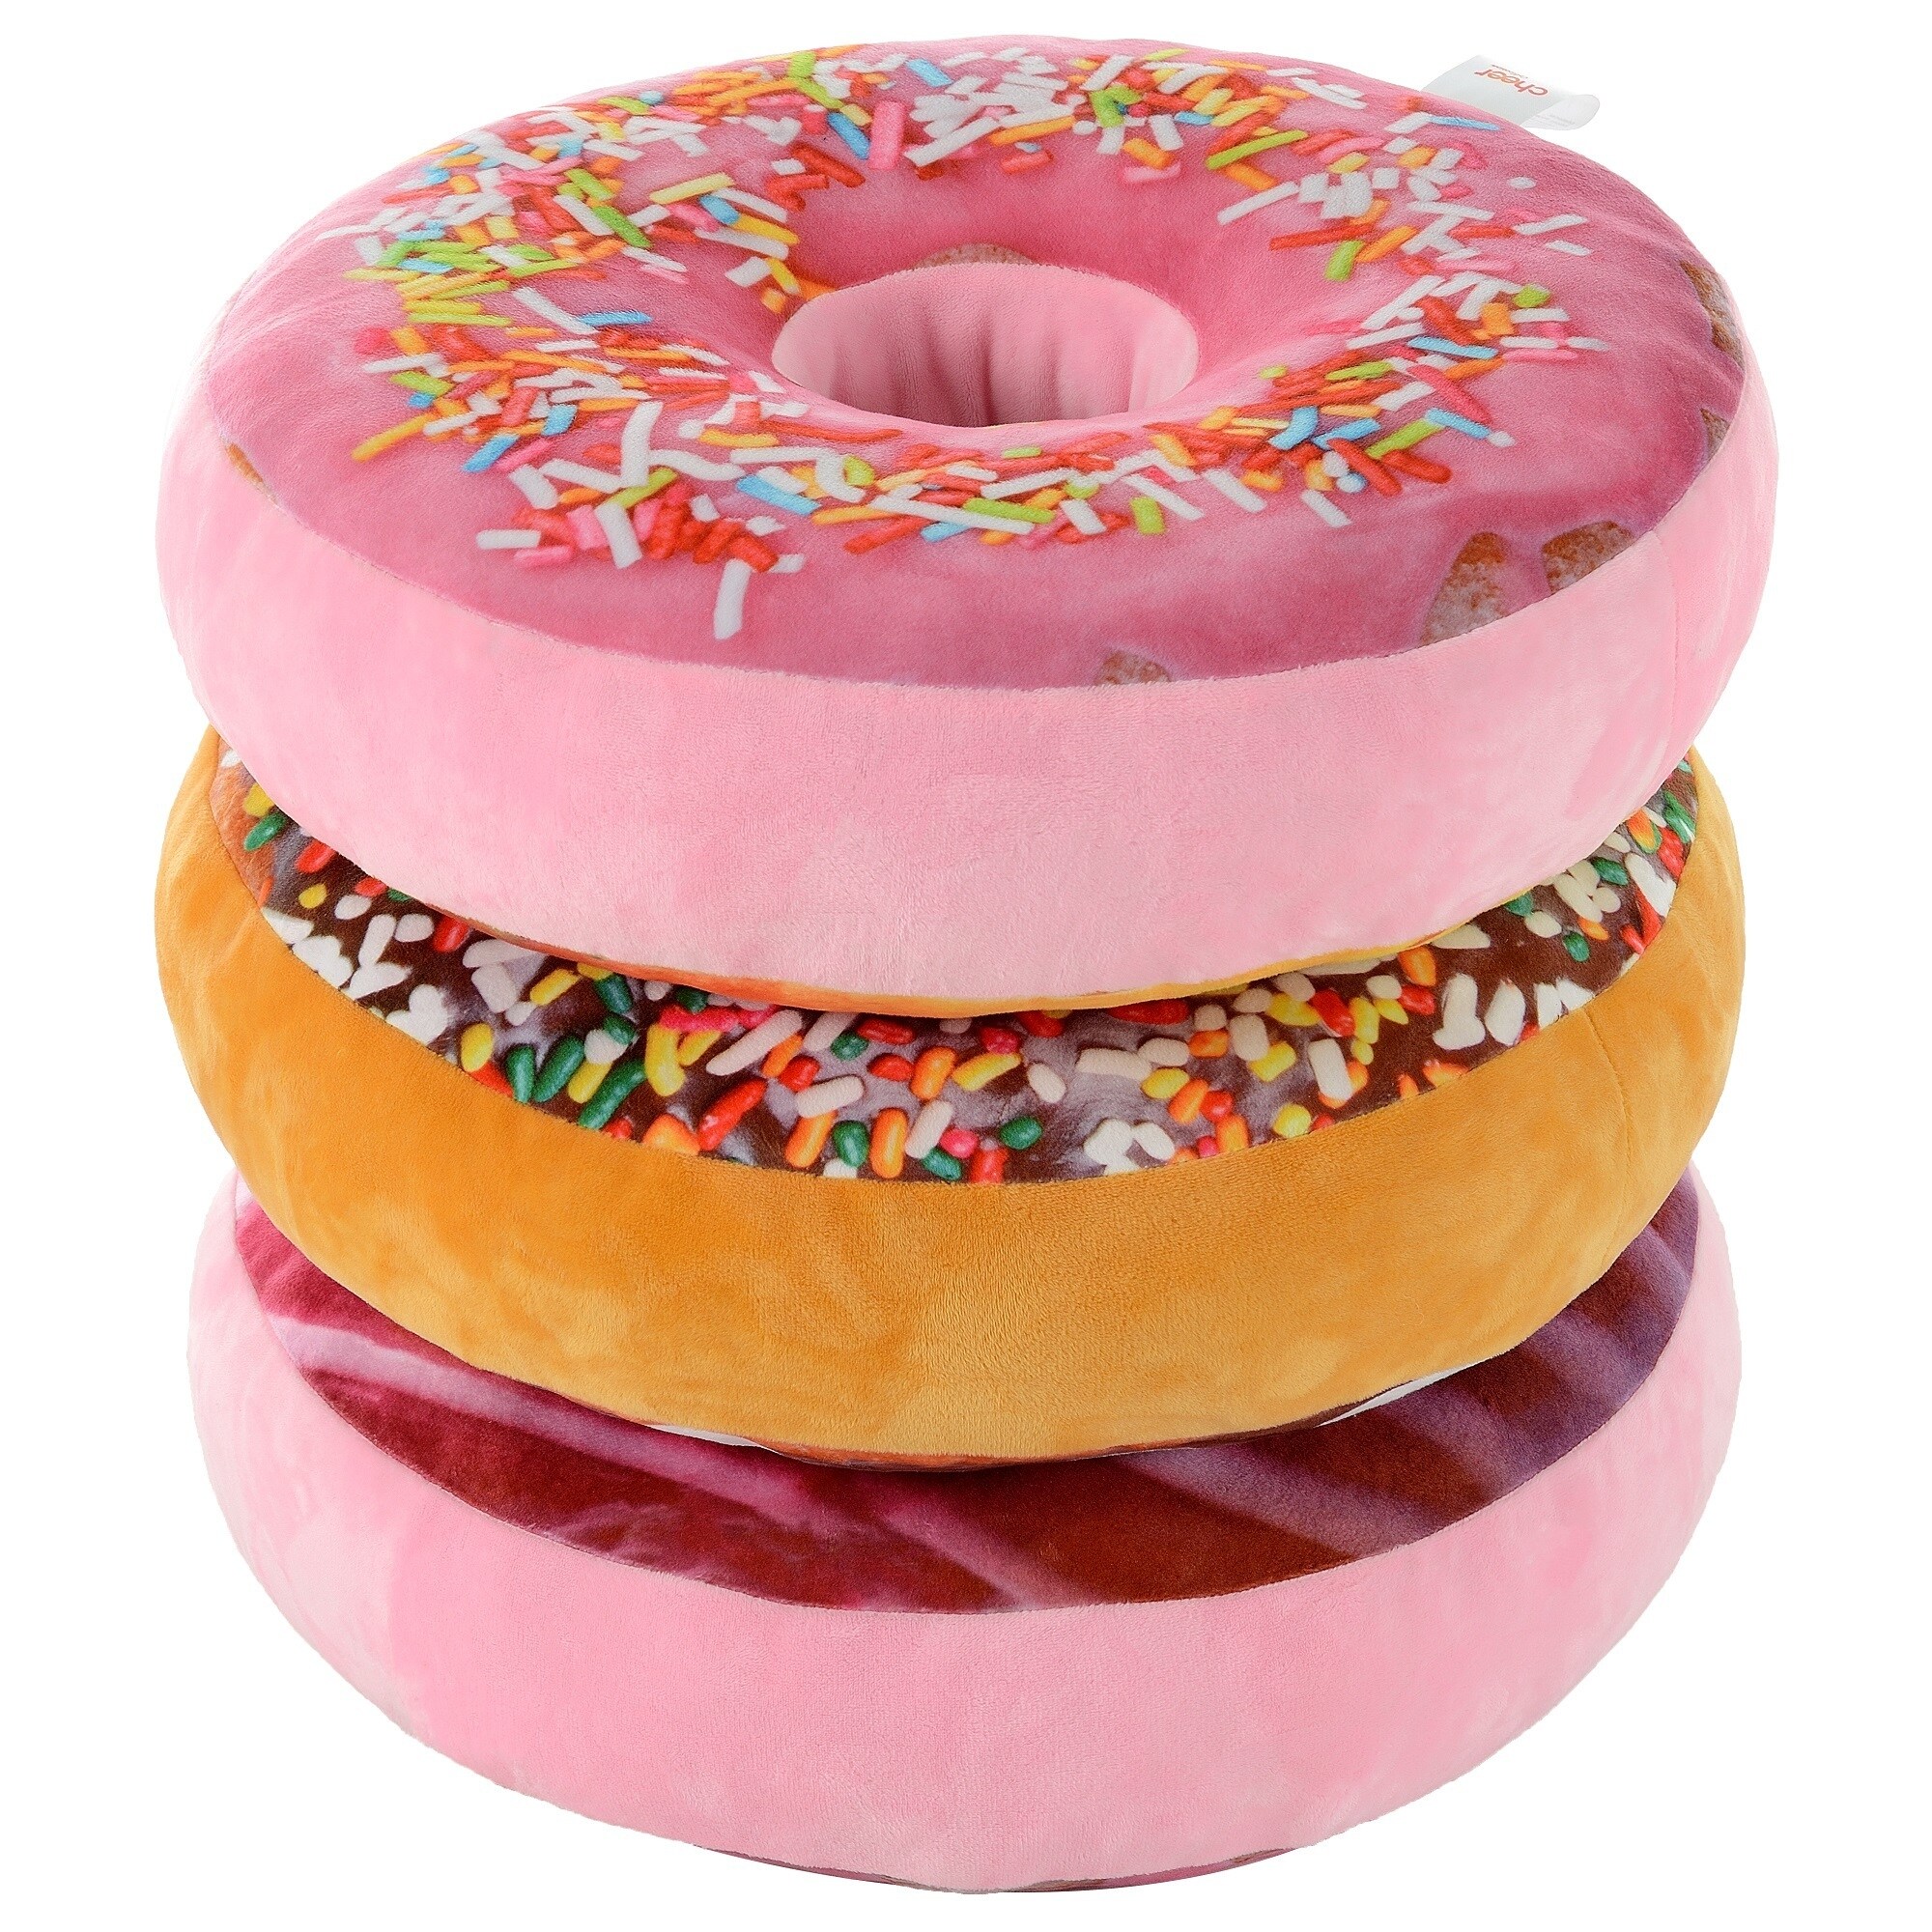 https://ak1.ostkcdn.com/images/products/16696244/Cheer-Collection-Reversible-Plush-Donut-Throw-Pillow-186edcb2-2516-423a-a3e1-3057ddc2ae7c.jpg